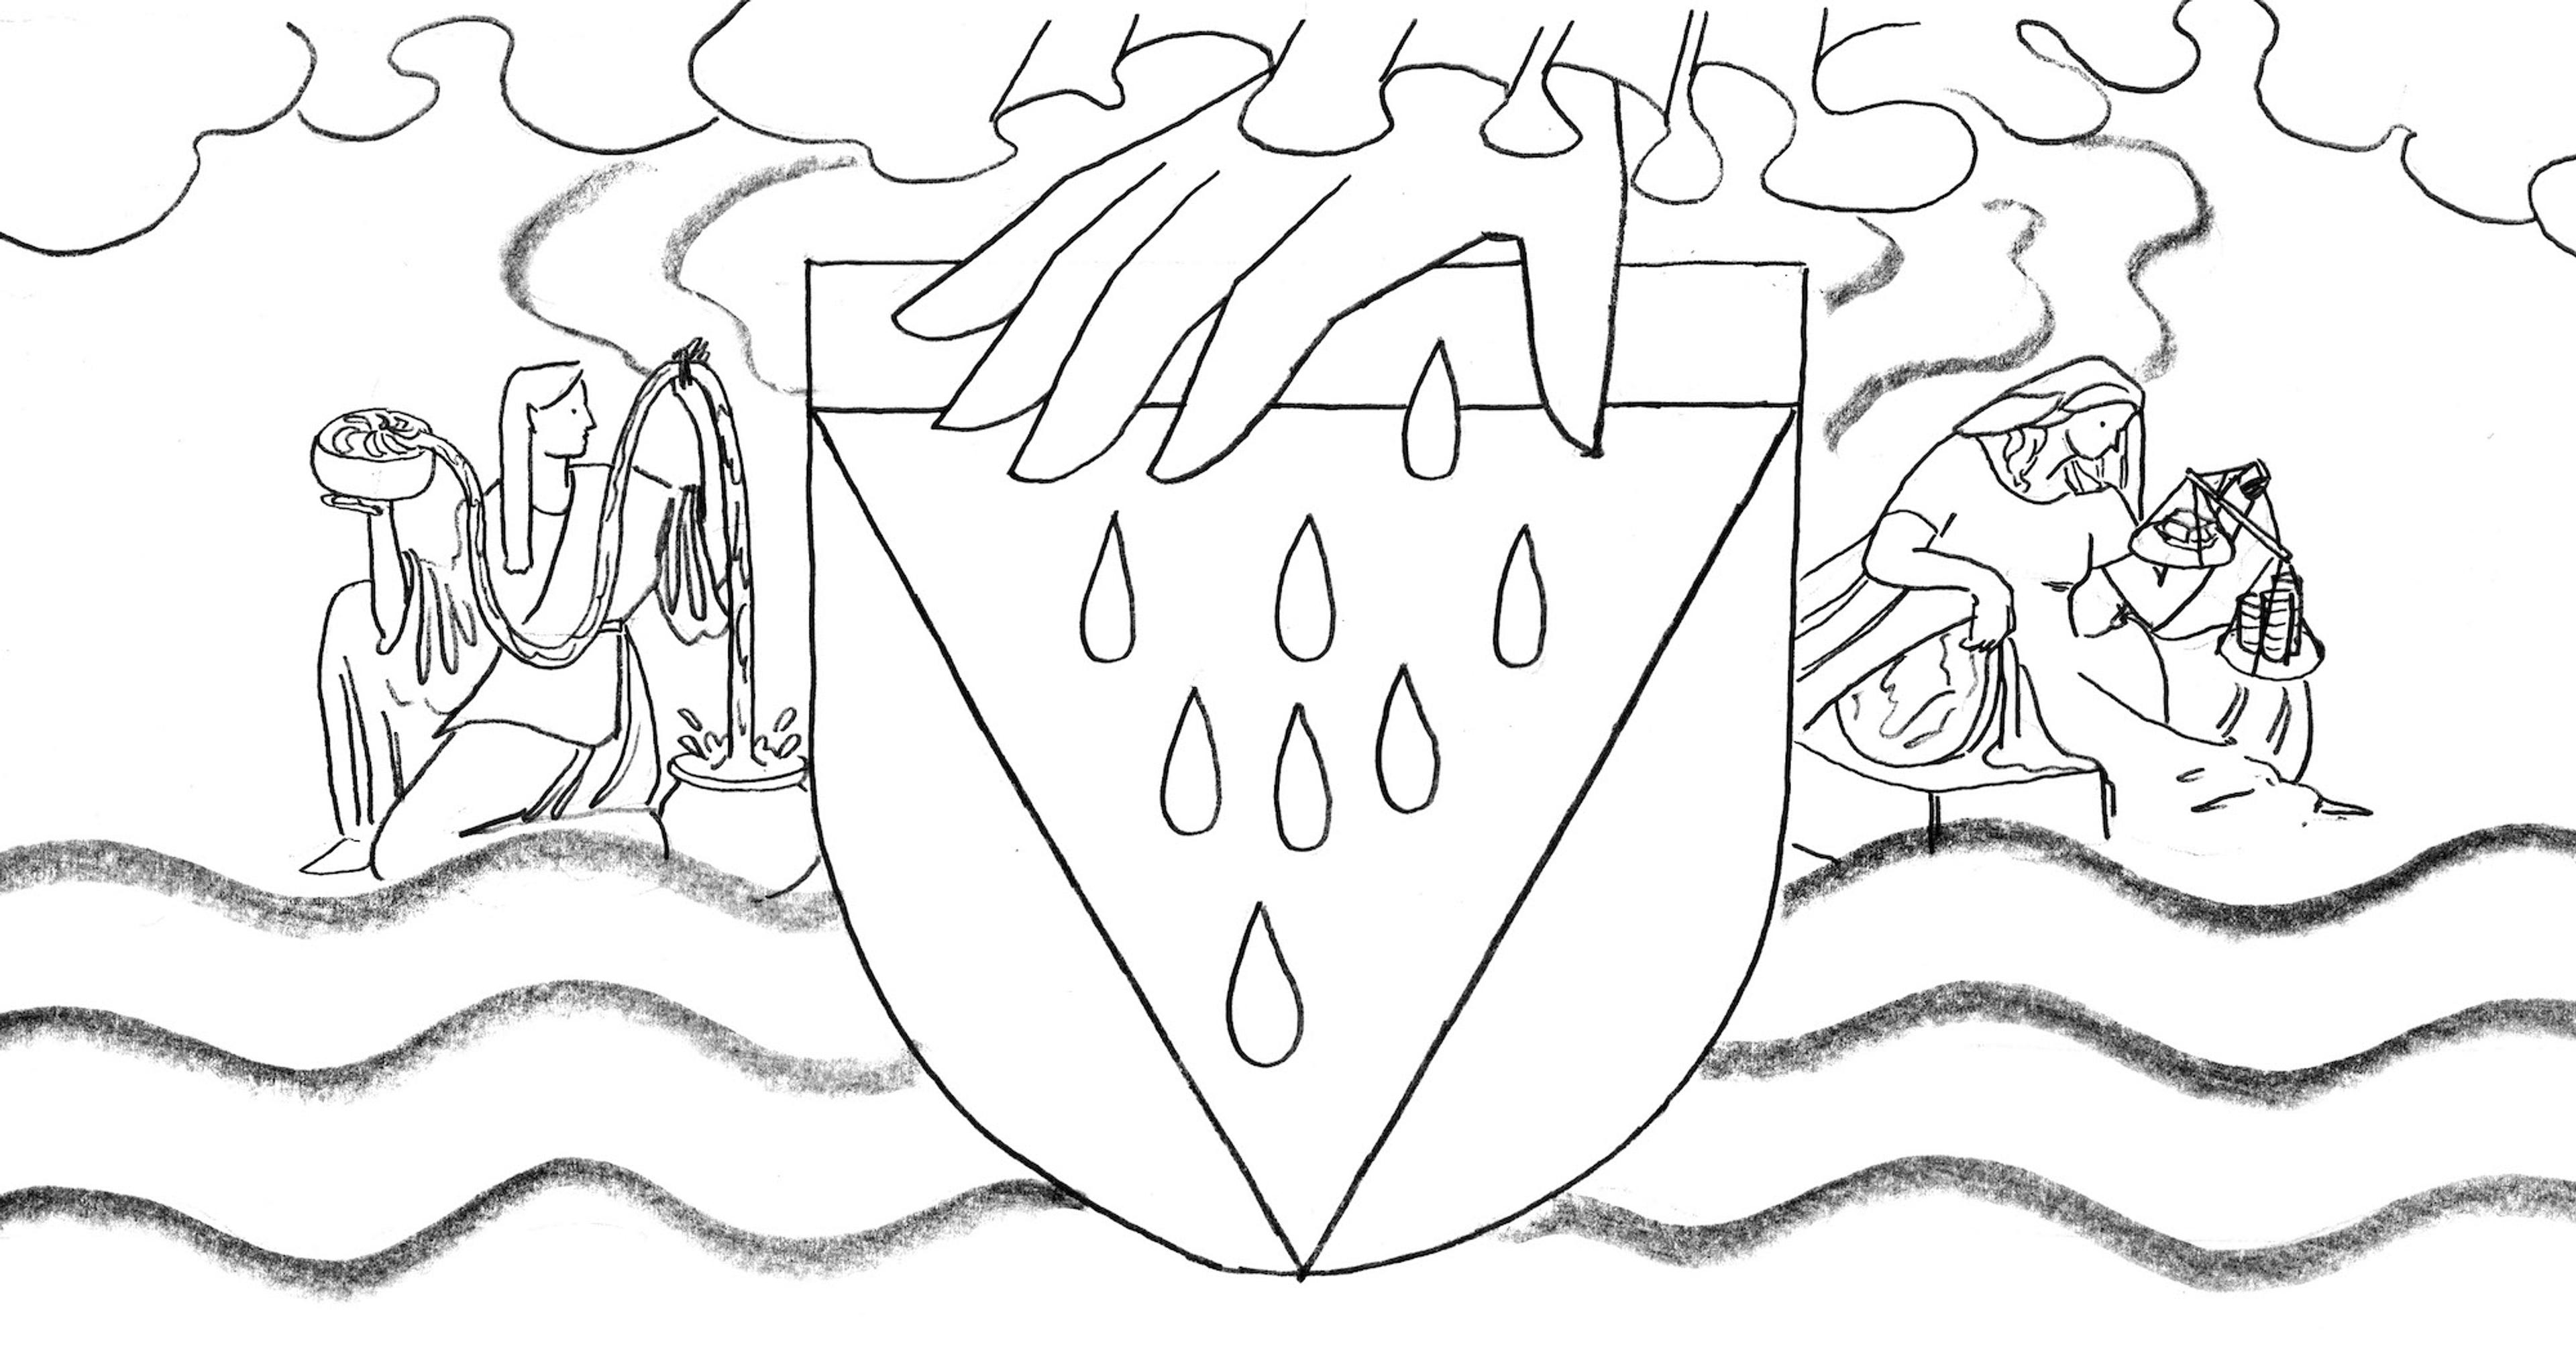 Line drawing of a crest showing a large hand sprinkling drops of water. A person on one side holds a coil of fabric and a woman on the right holds scales holding weights and coins